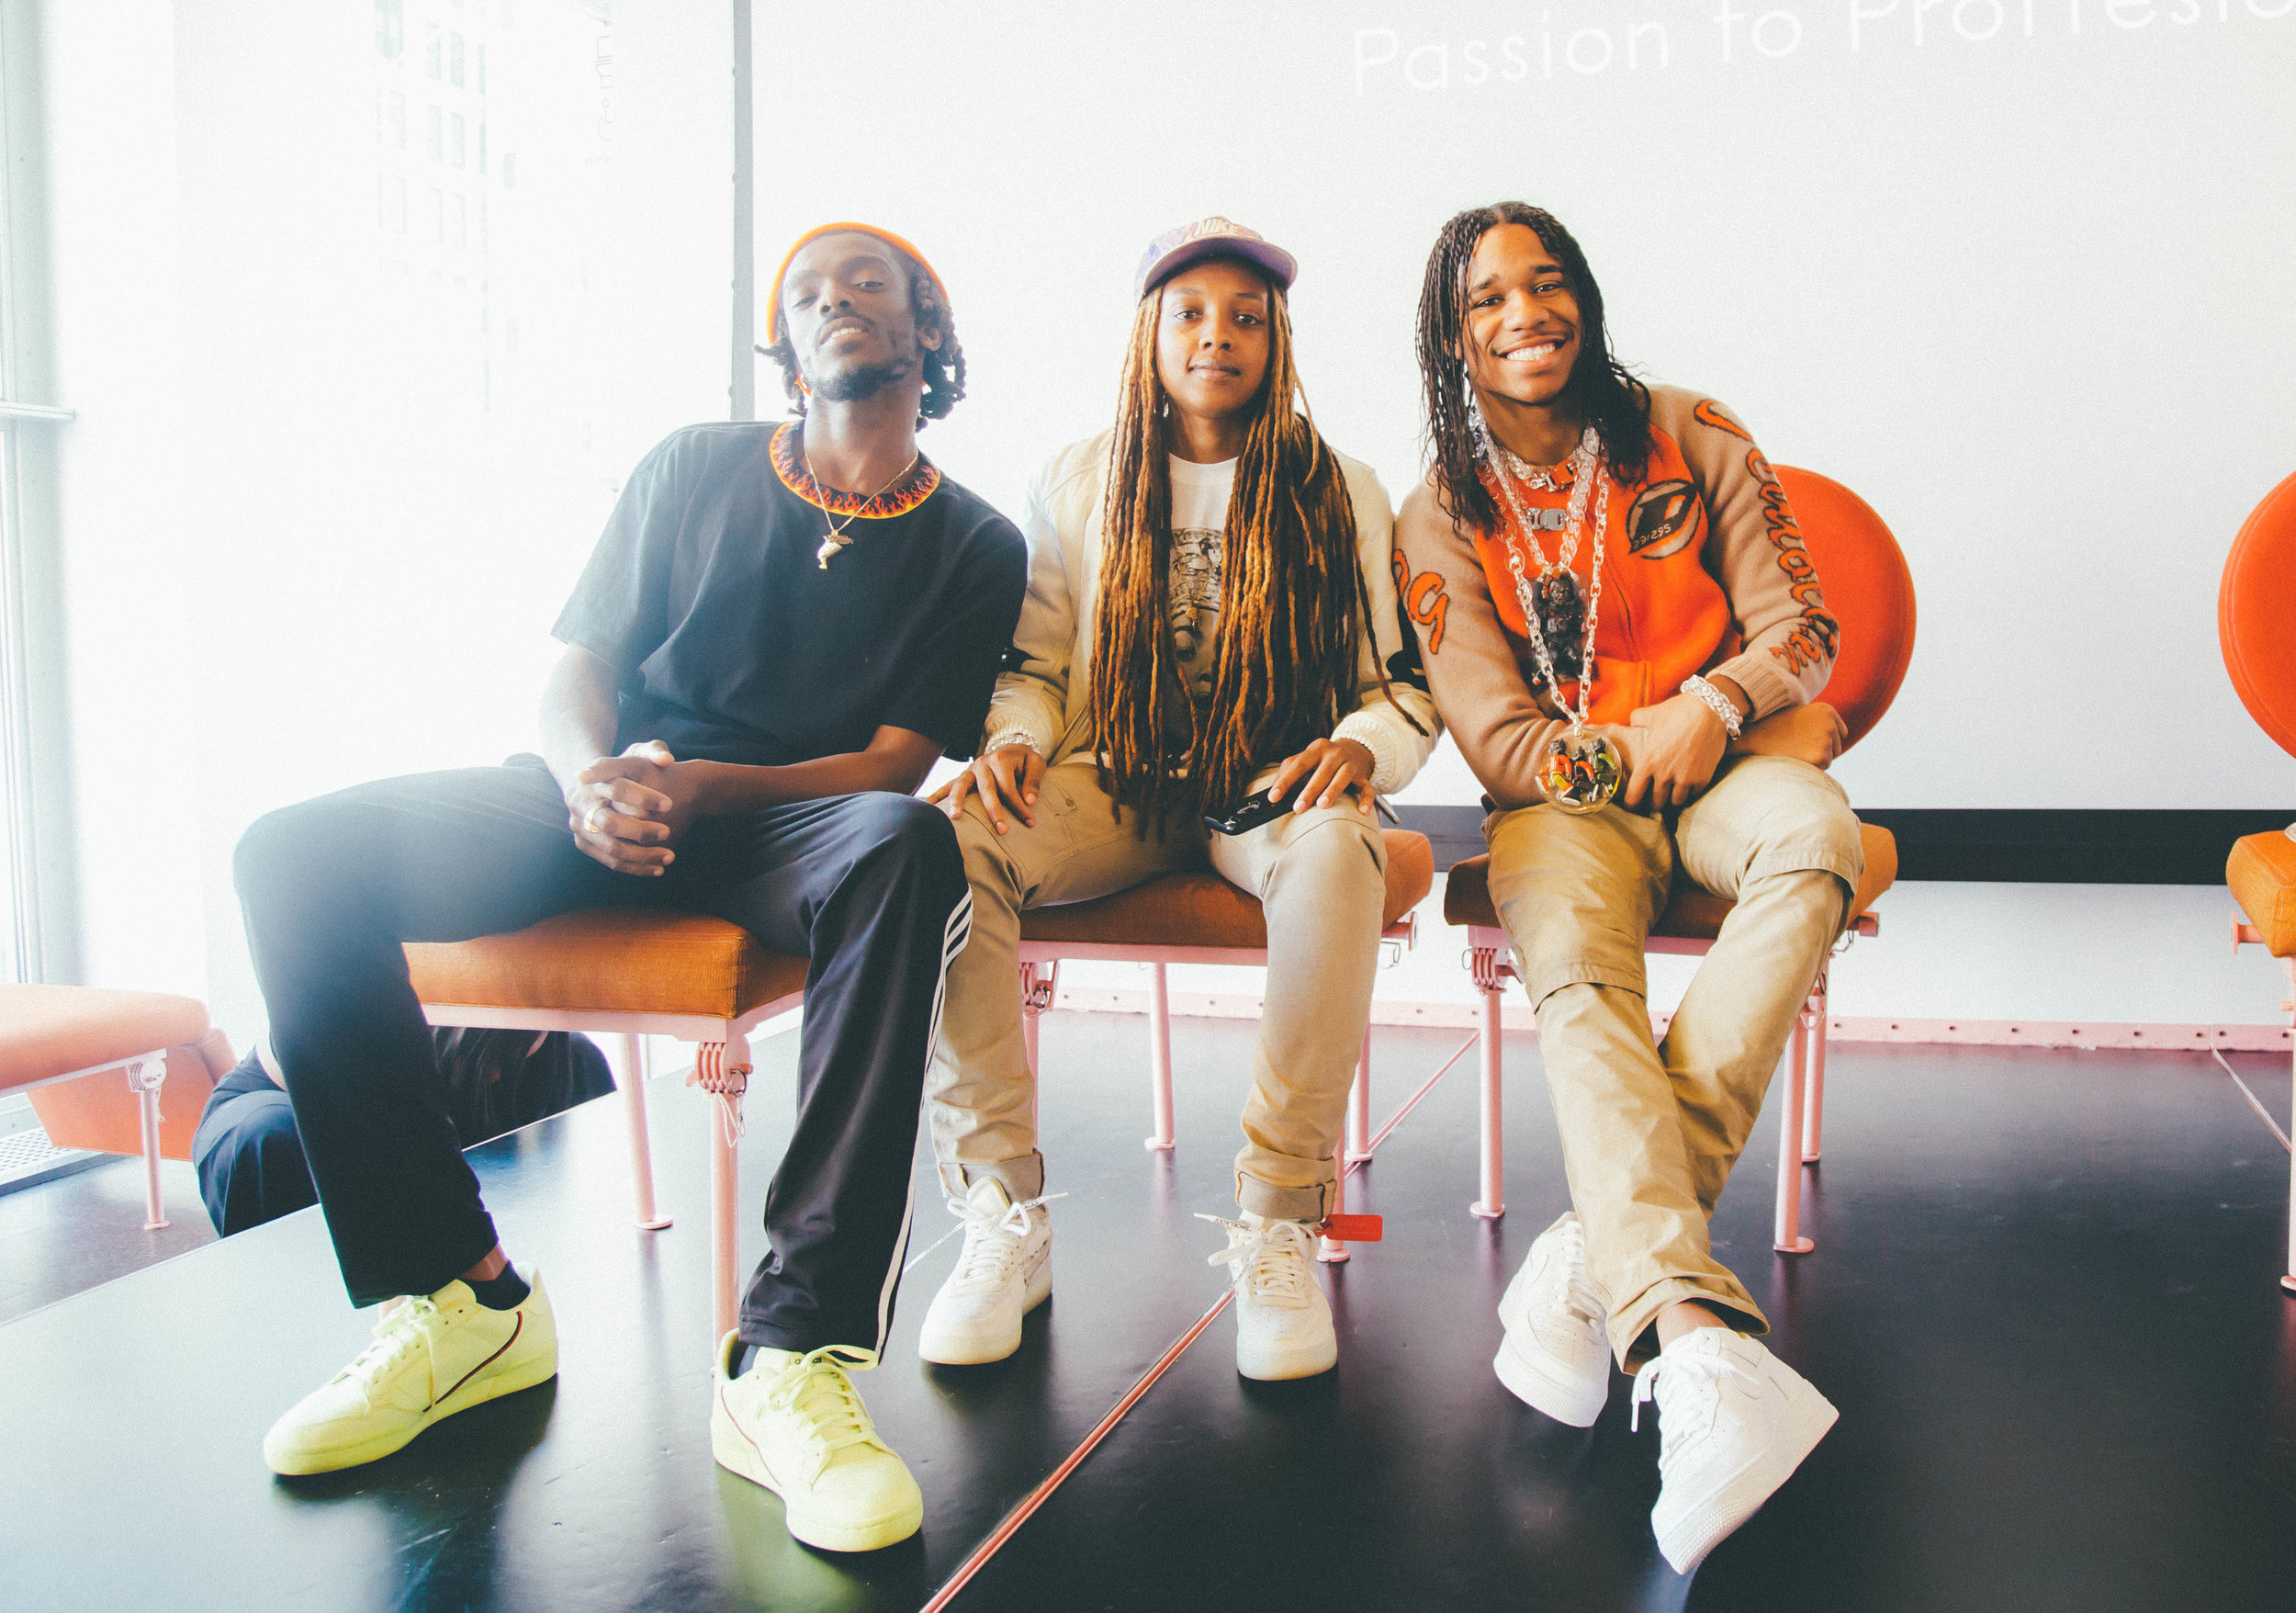  Left to Right: Guest speakers Des Money, Sheila Rashid, and Kristopher Kites after their panel discussion at the Museum of Contemporary Art Chicago. 2019.  photo by: Africanist 